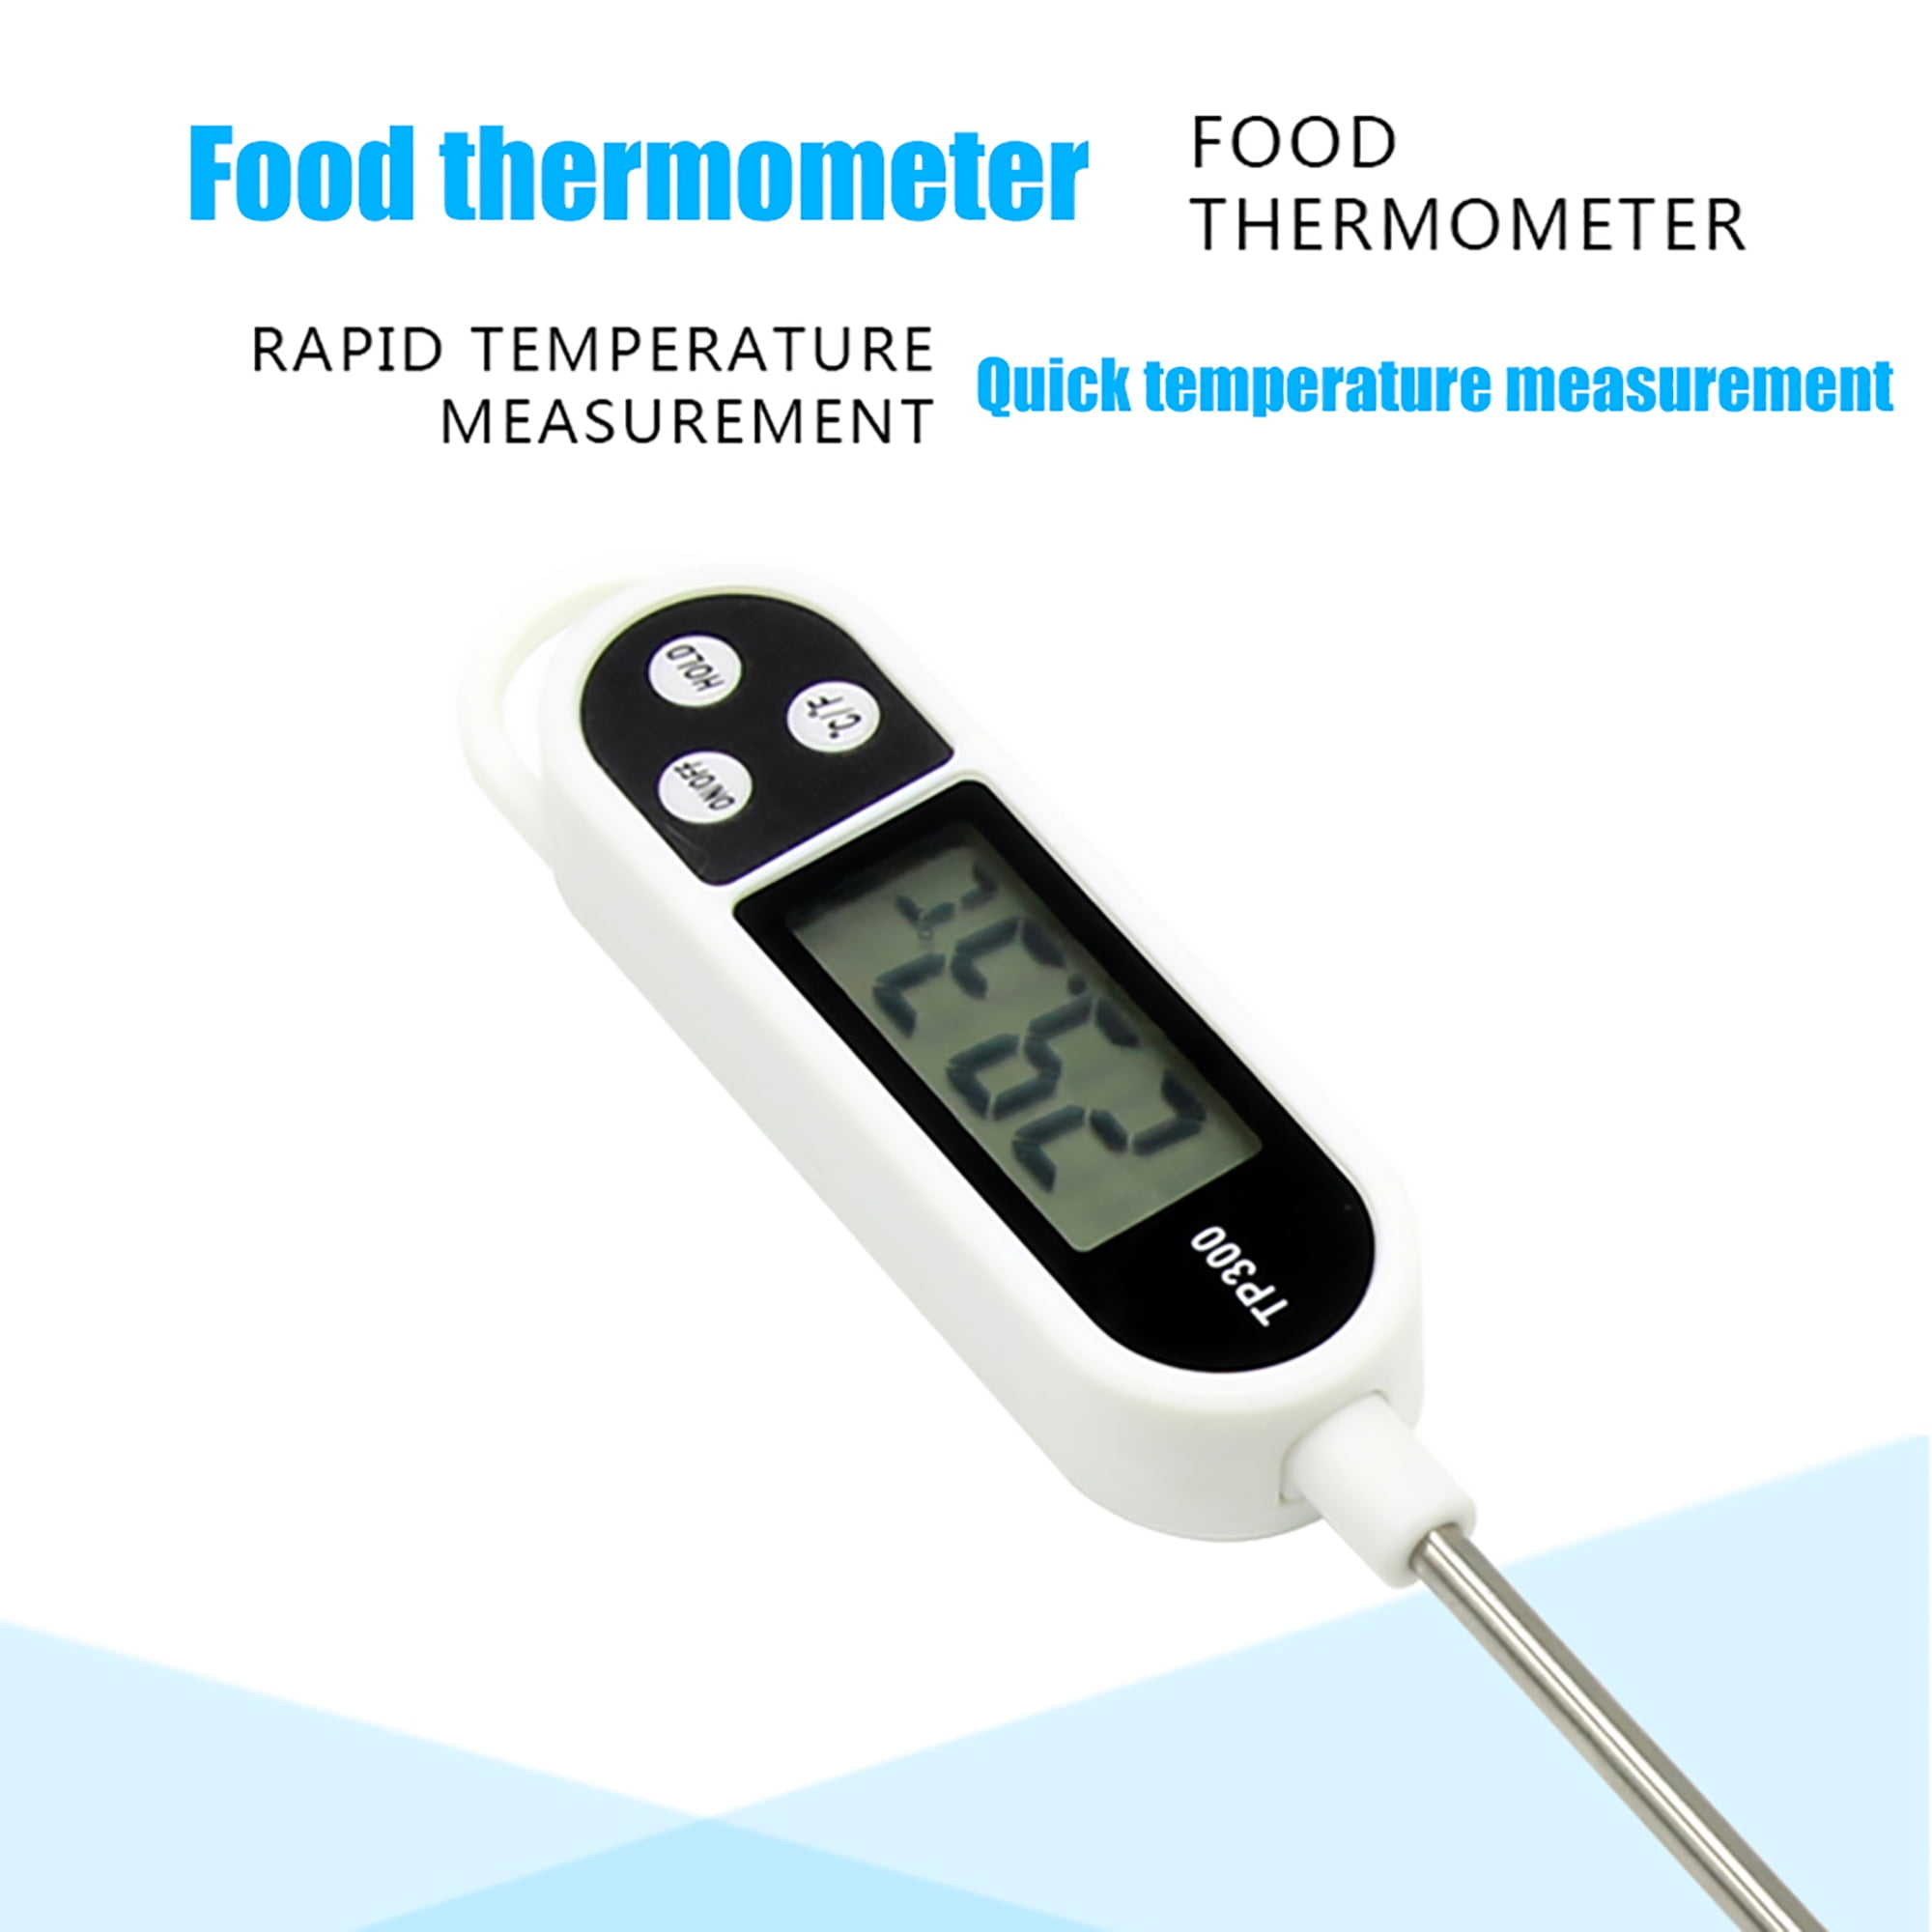 FASLMH TP300 LCD Digital Meat Thermometer Electronic Cooking Food Kitchen  BBQ Probe Water Milk Oil Liquid Temperature Sensor Gauge Meter 